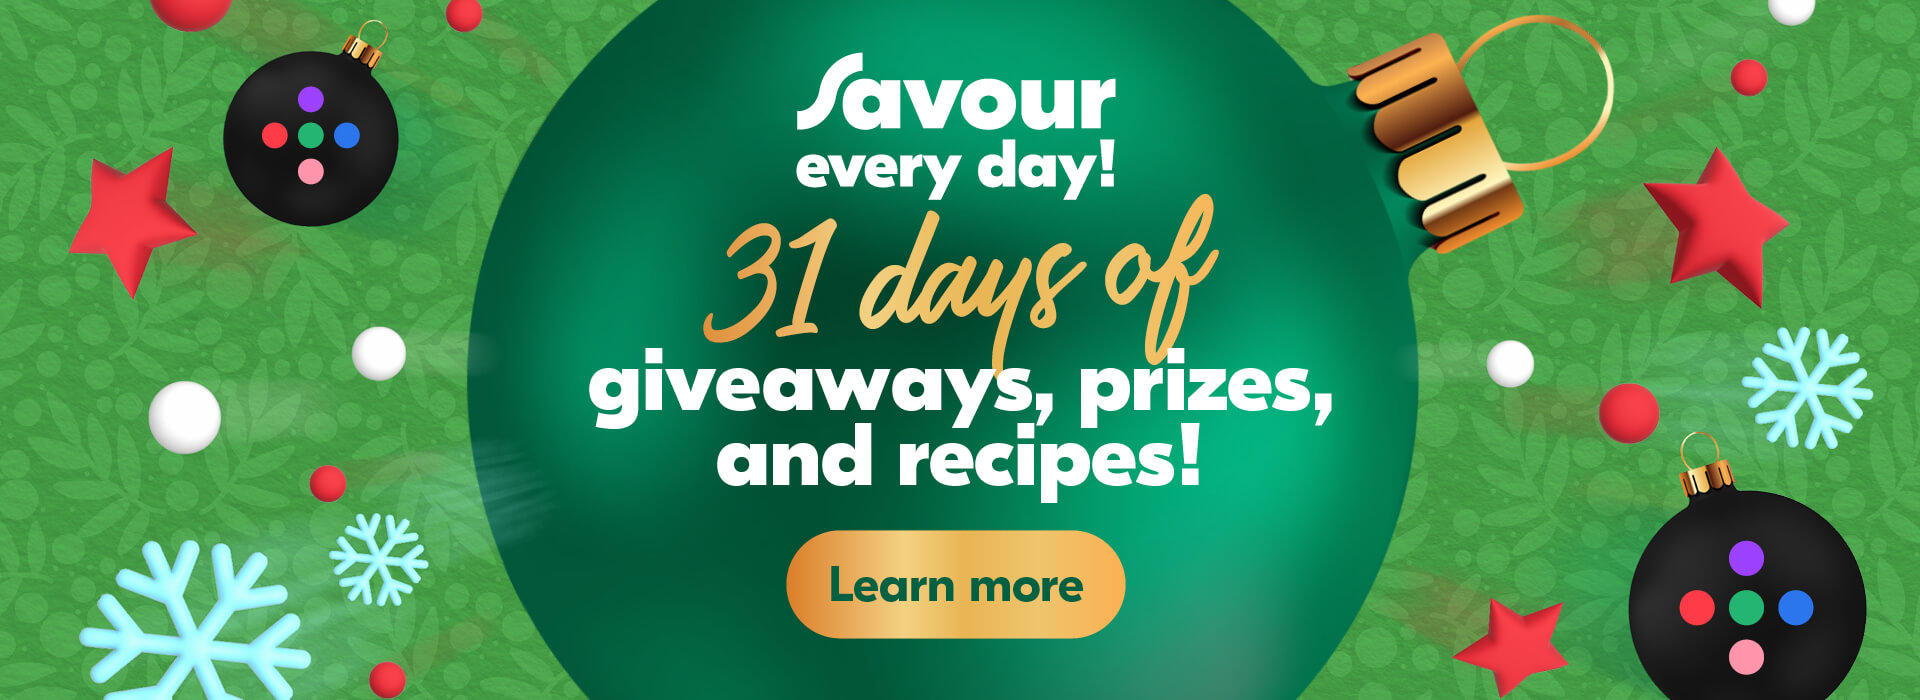 Text Reading ‘Savour every day! 31 days of giveaways, prizes and recipes! ‘Learn more by clicking the button below.'